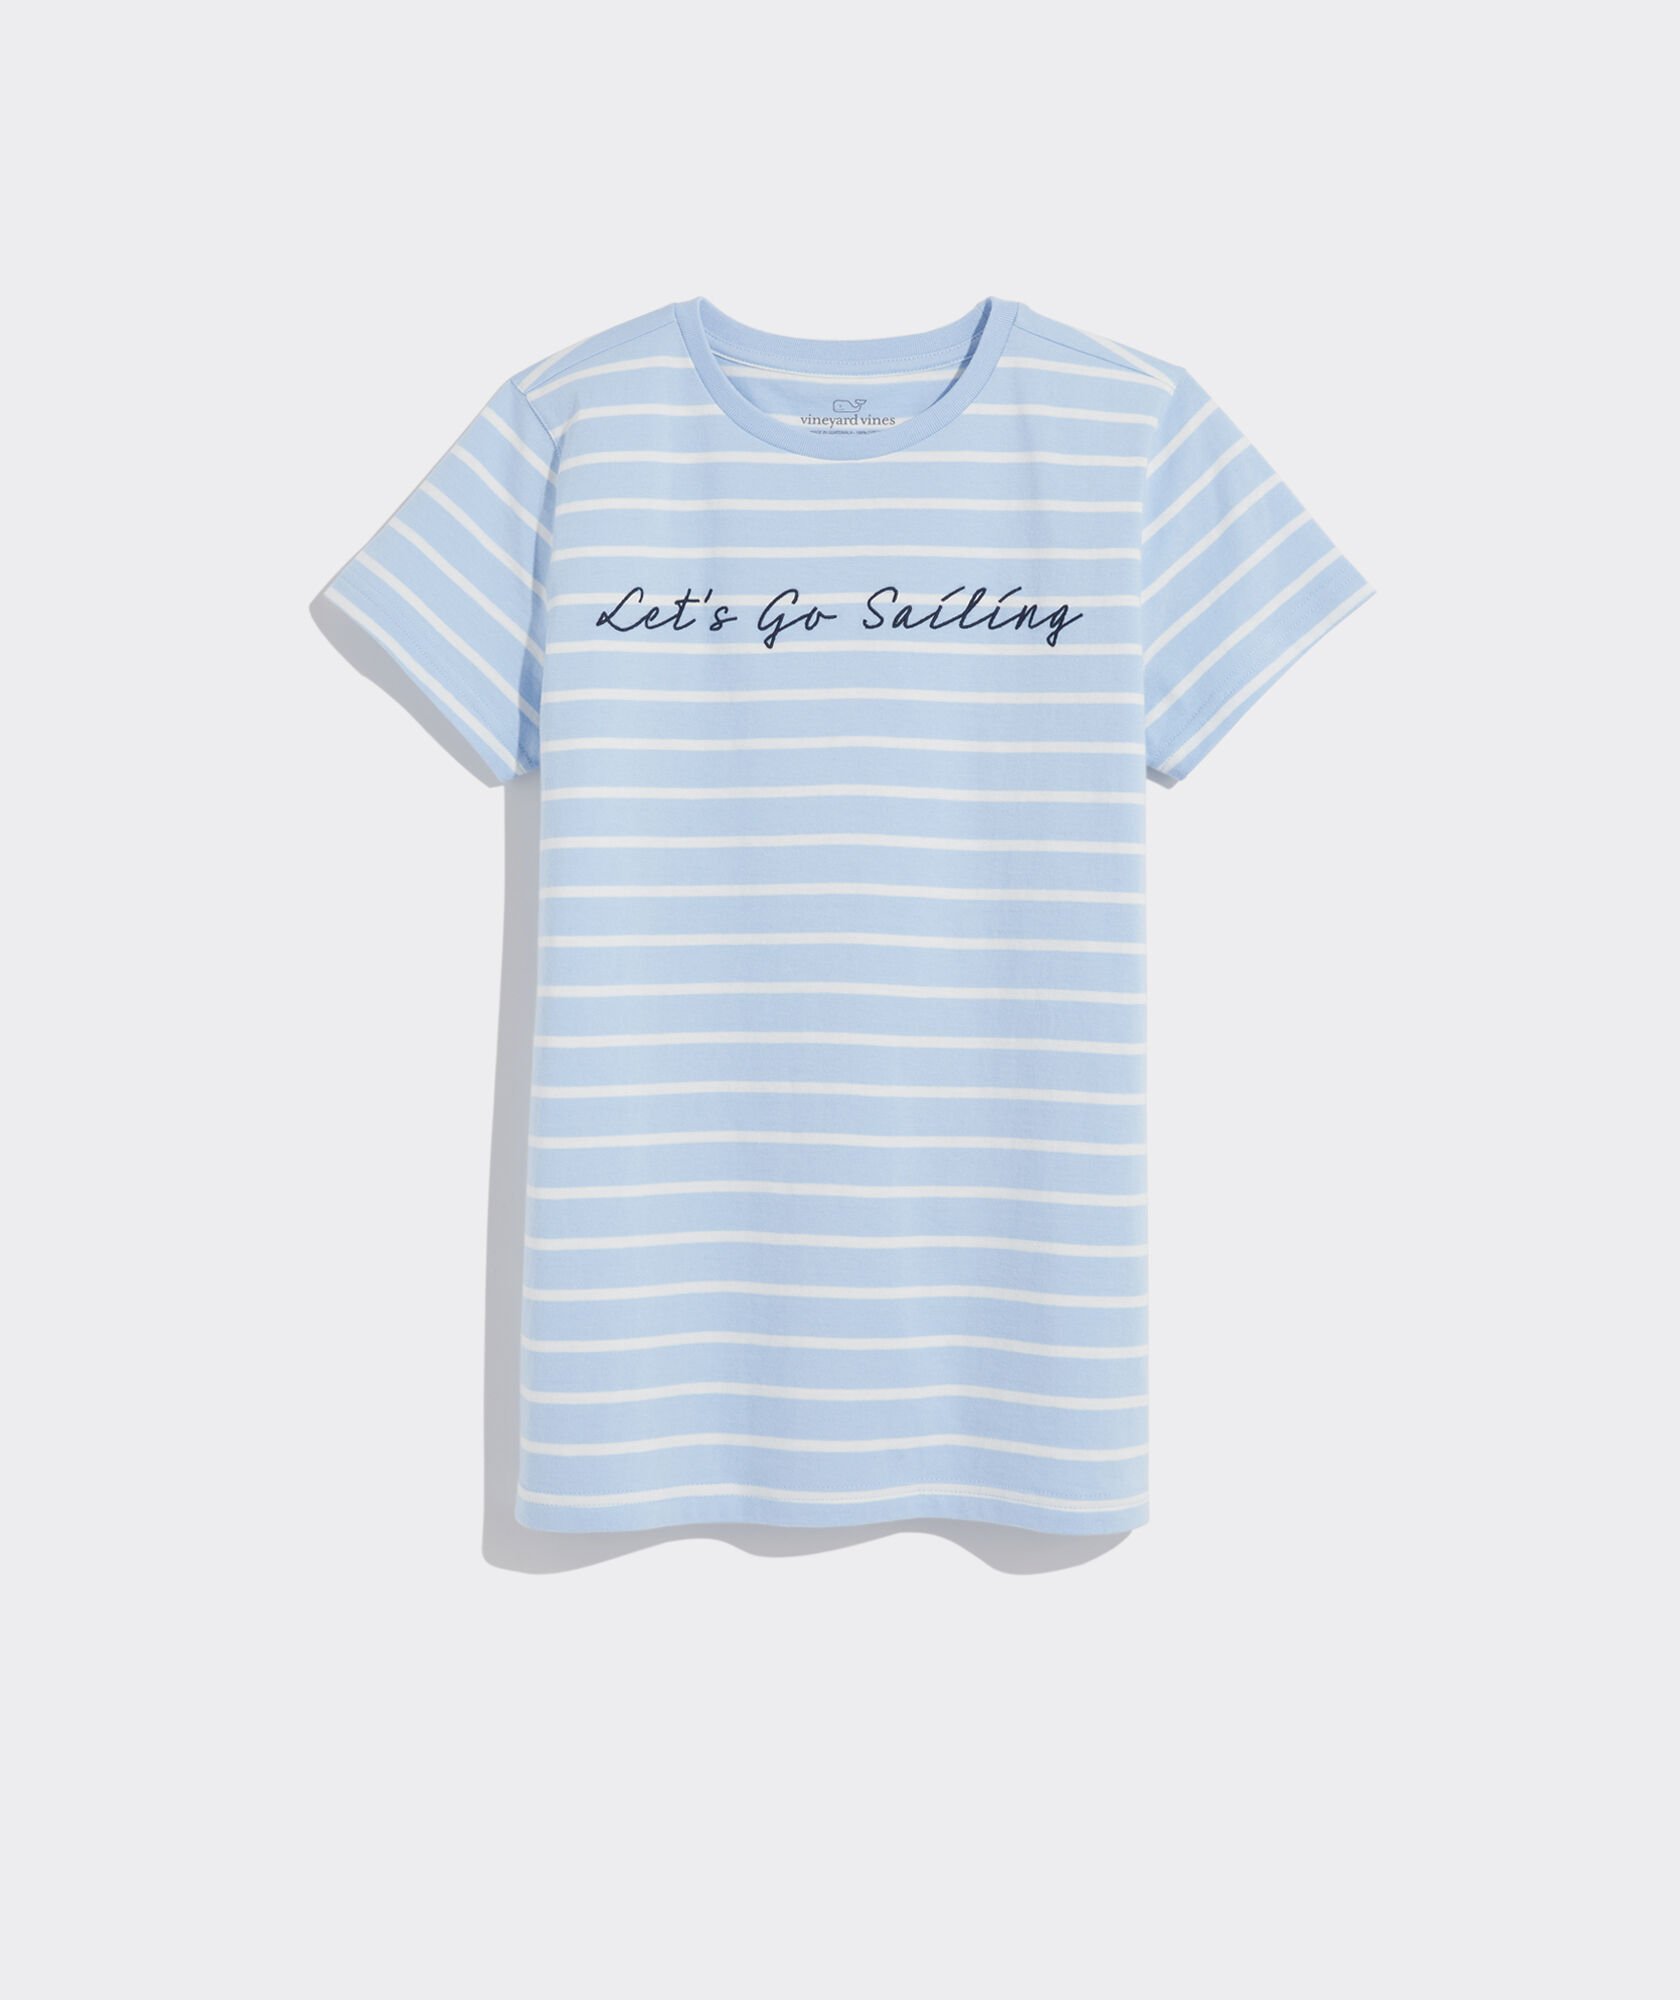 Striped Sailing Embroidered Tee